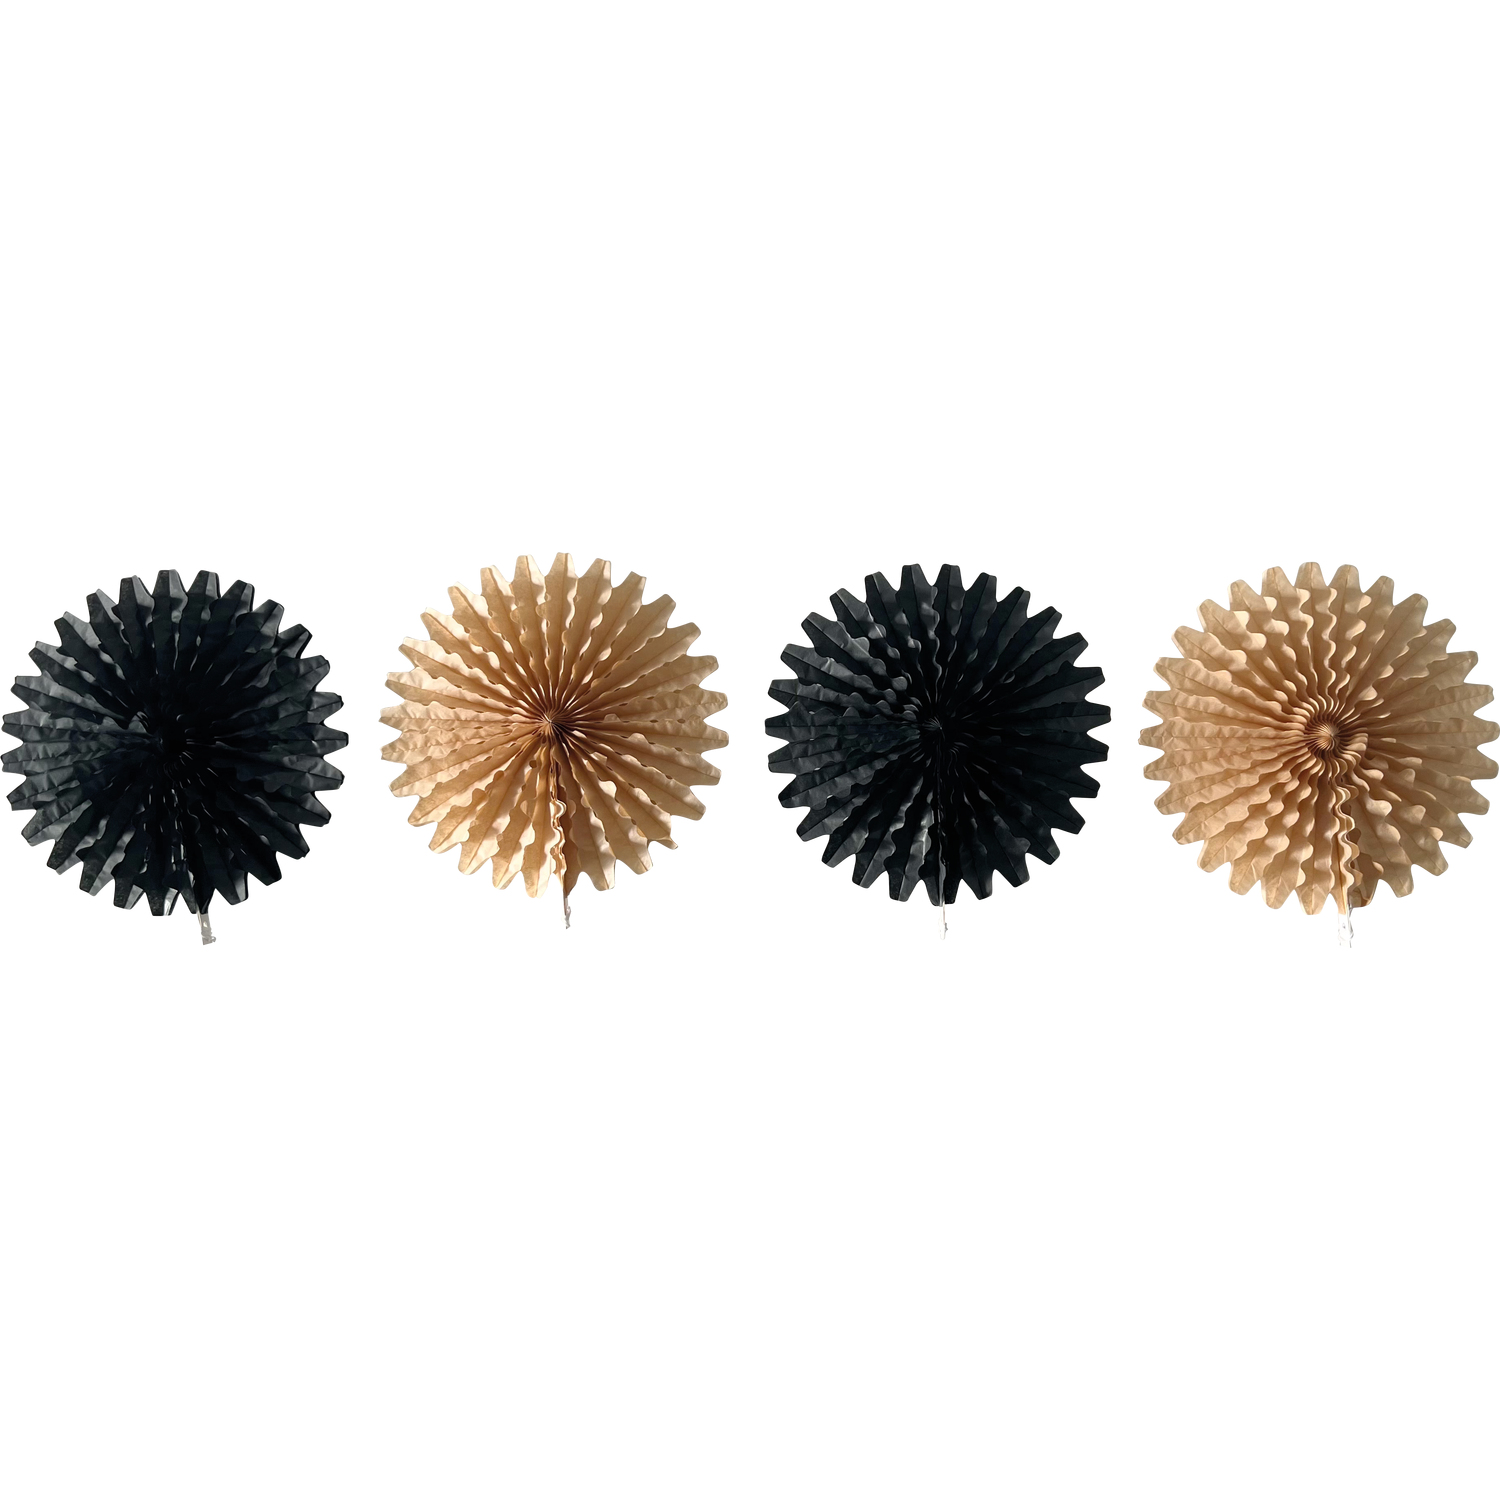 Pack of 4 Black and Gold Pom Pom Decorations Image